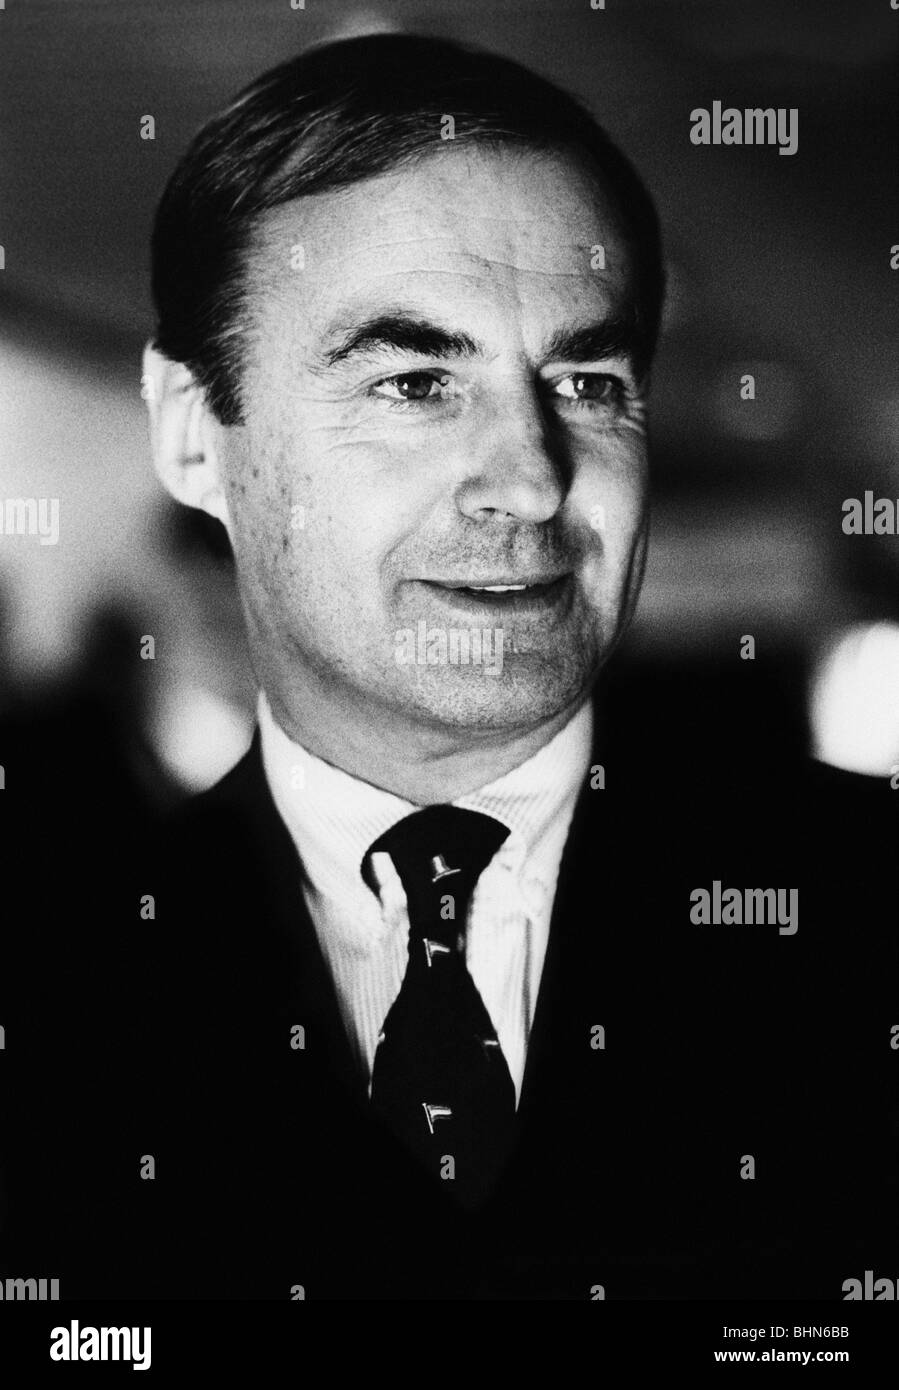 Wuerzbach, Peter Kurt, * 15.12.1937, German politician (CDU), Parliamentary State Secretary at the German Federal Ministry of Defence 1982 - 1988, portrait, 1980s, Stock Photo